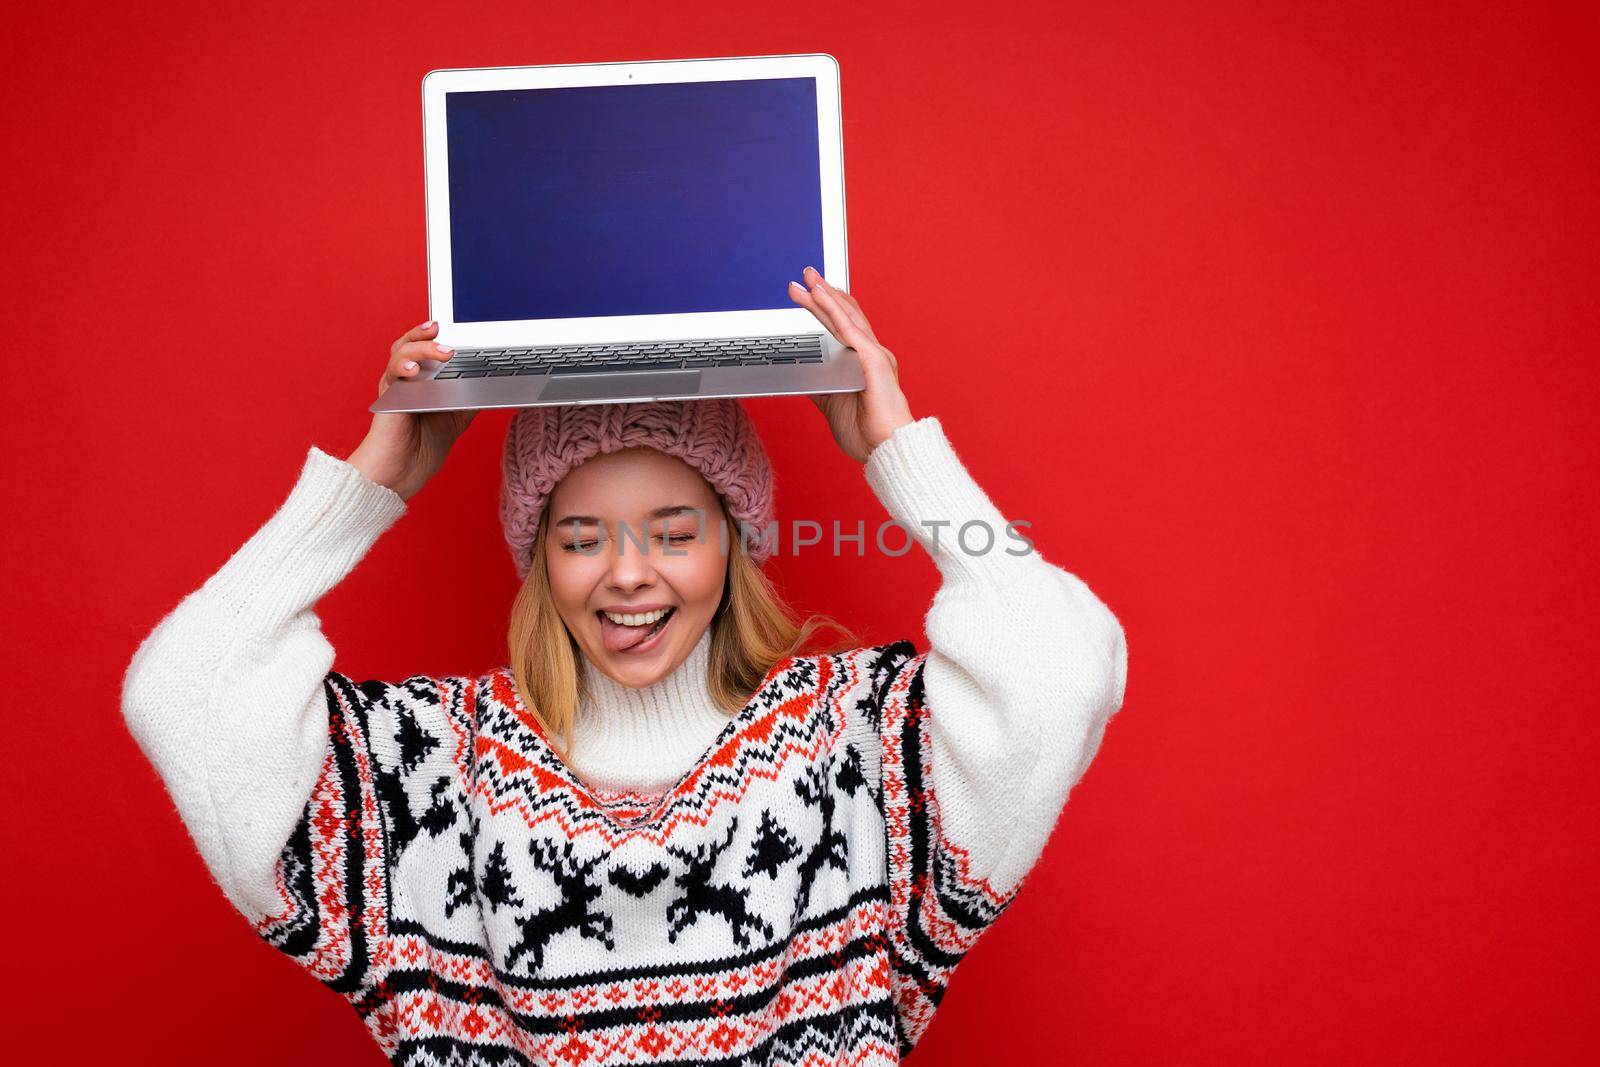 Photo shot of beautiful smiling blonde young woman holding computer laptop with empty monitor screen with mock up and copy space wearing knitted winter hat and sweater showing tongue isolated over red wall background.